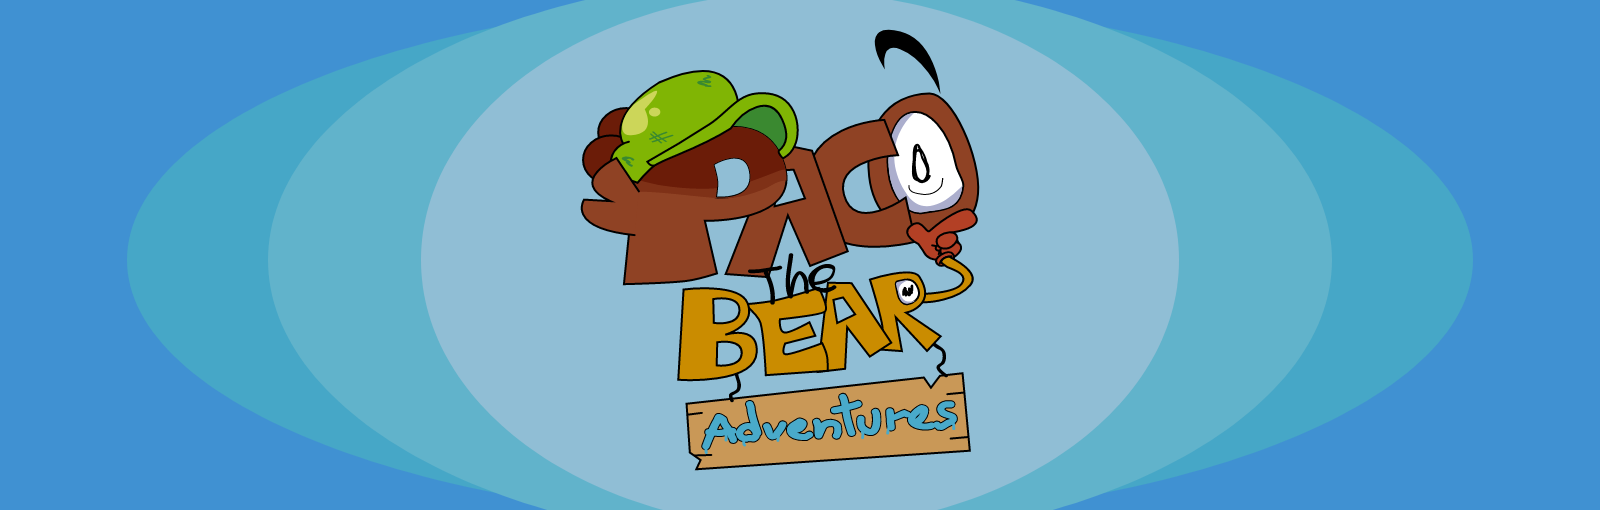 Paco The Bear Adventures